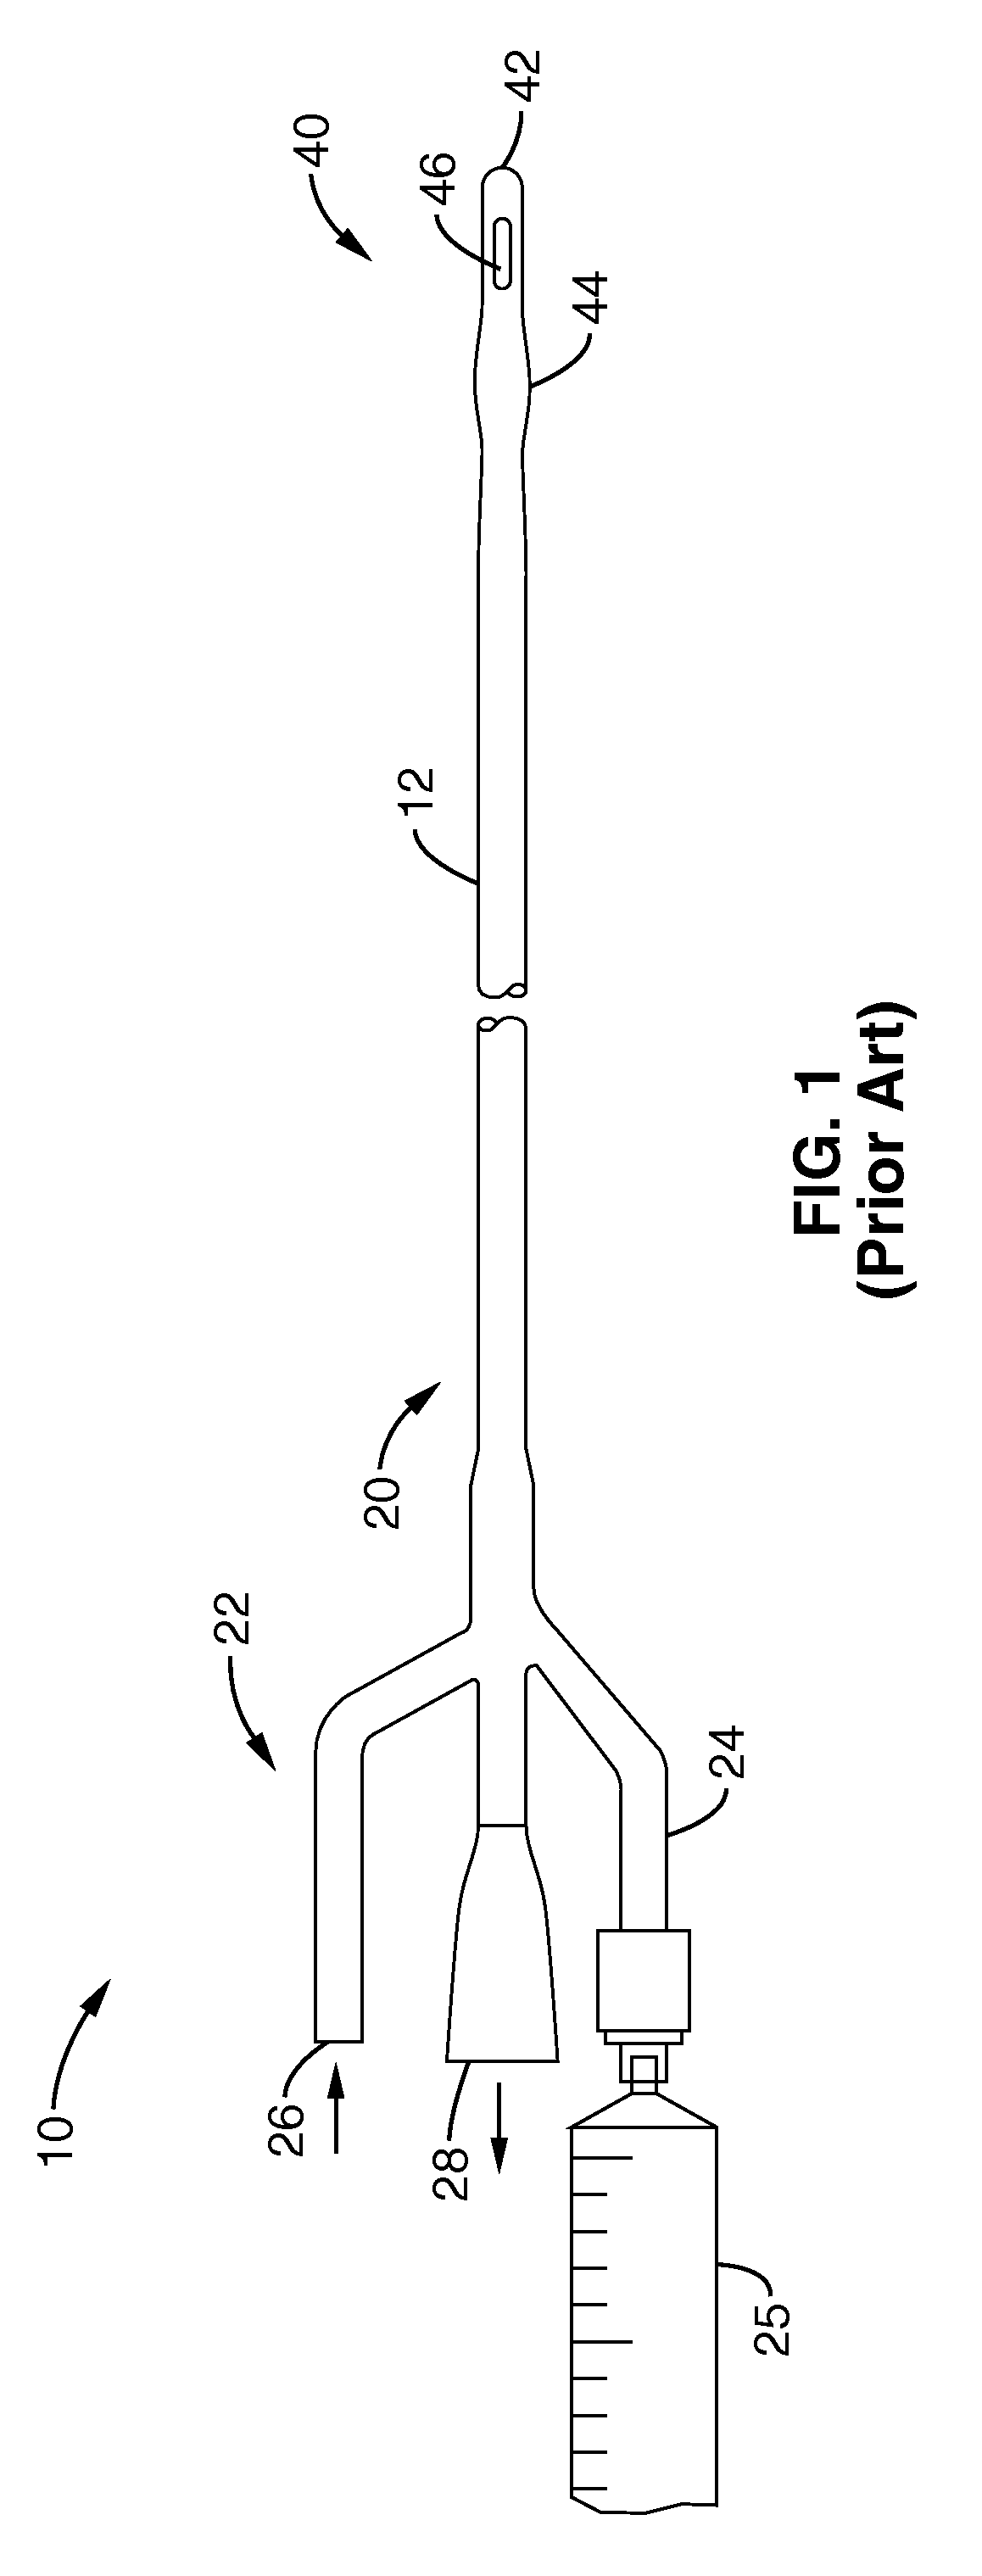 System and method for urinary tract cell collection, diagnosis, and chemotherapy